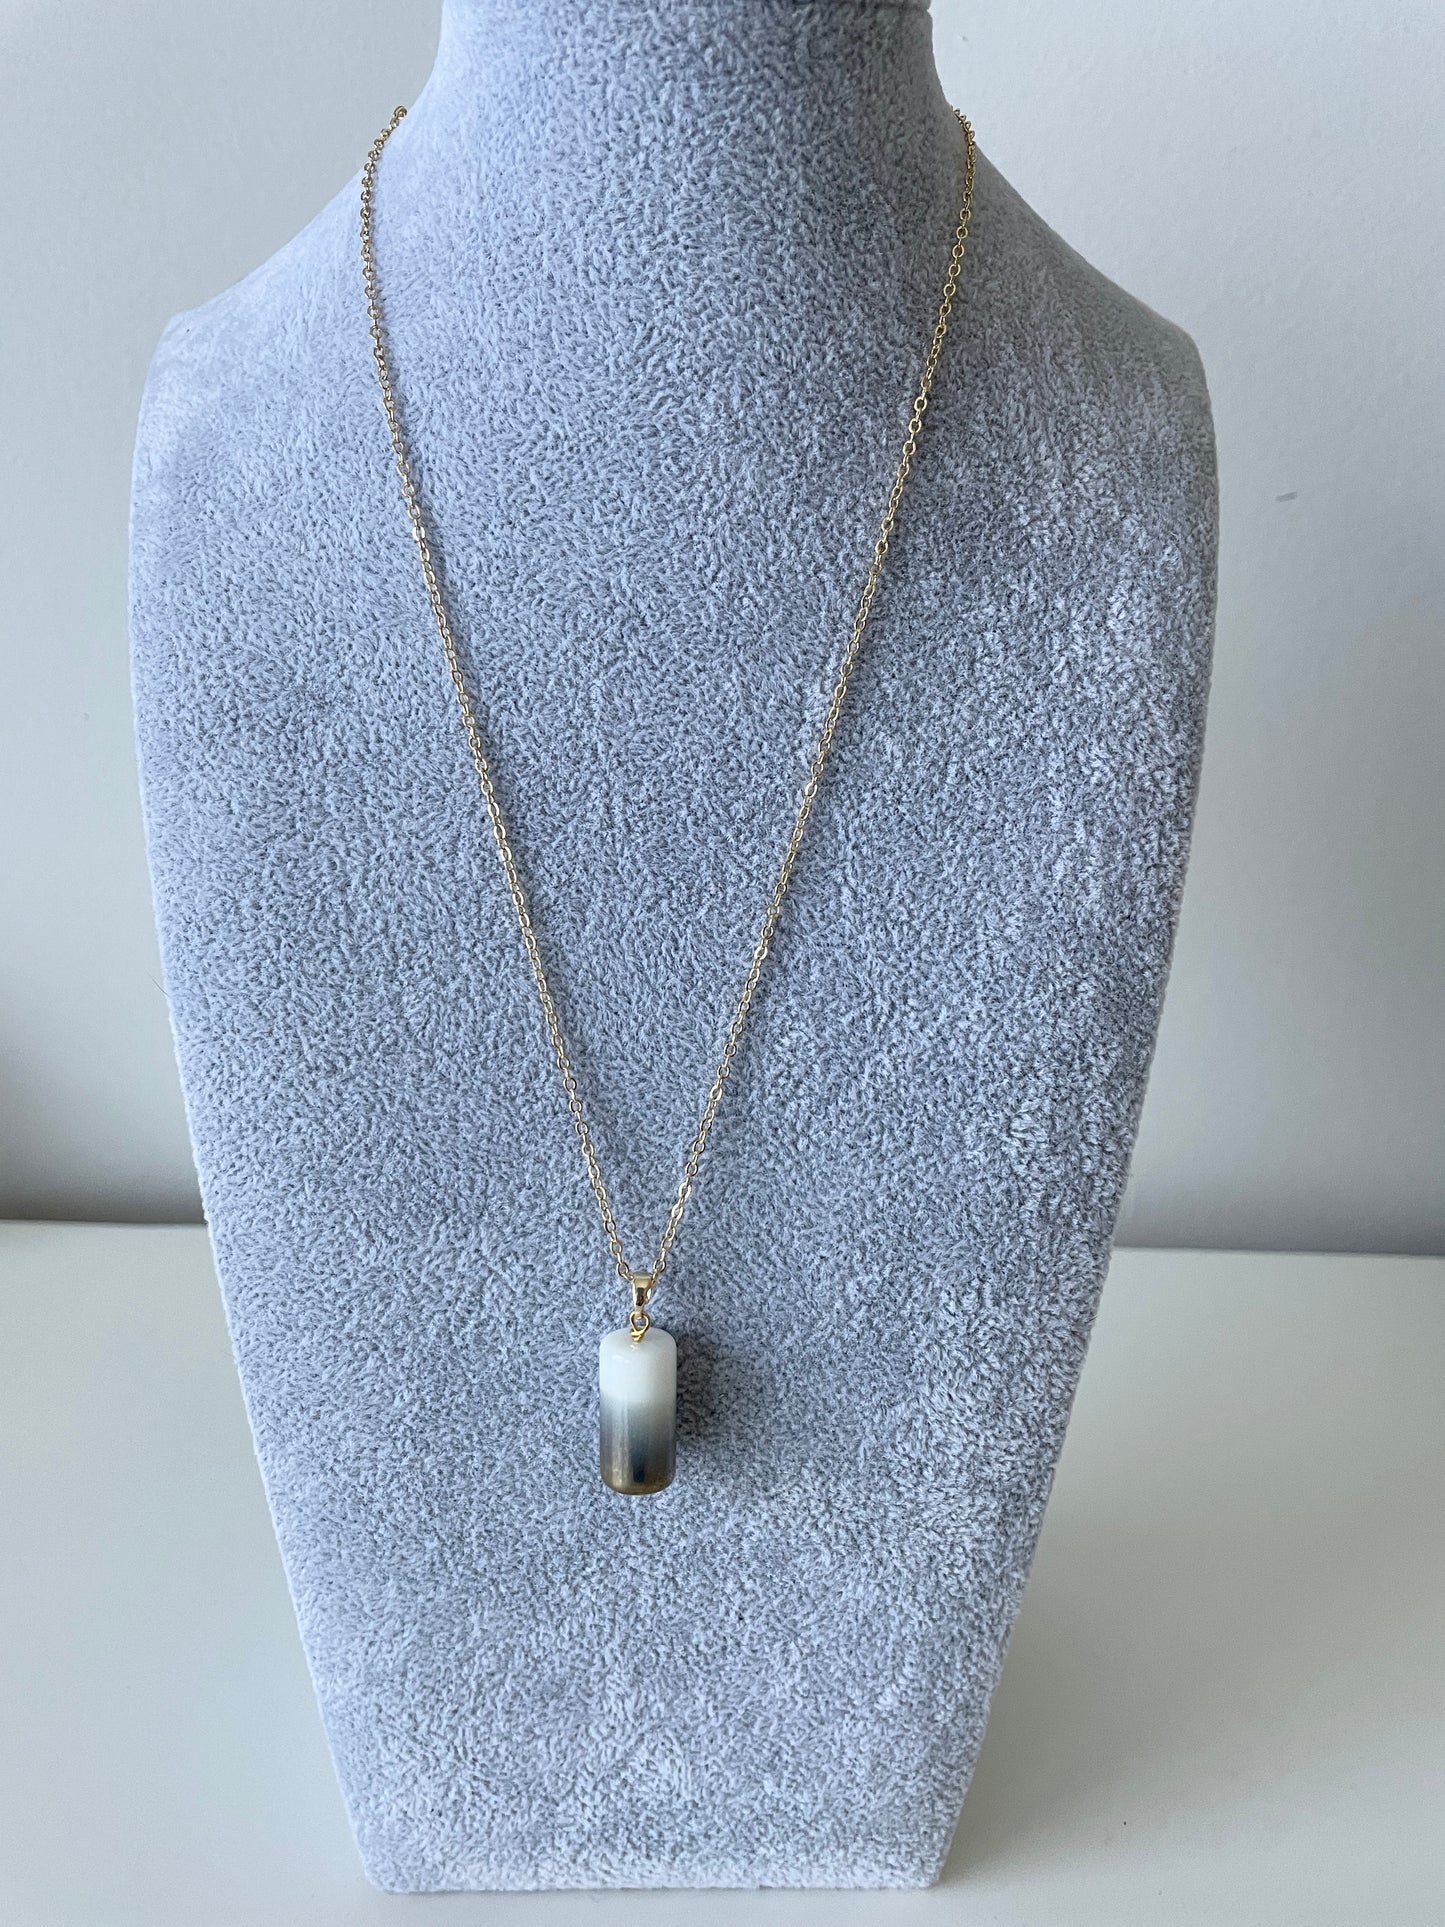 Grey & White Ombre Bead Necklace